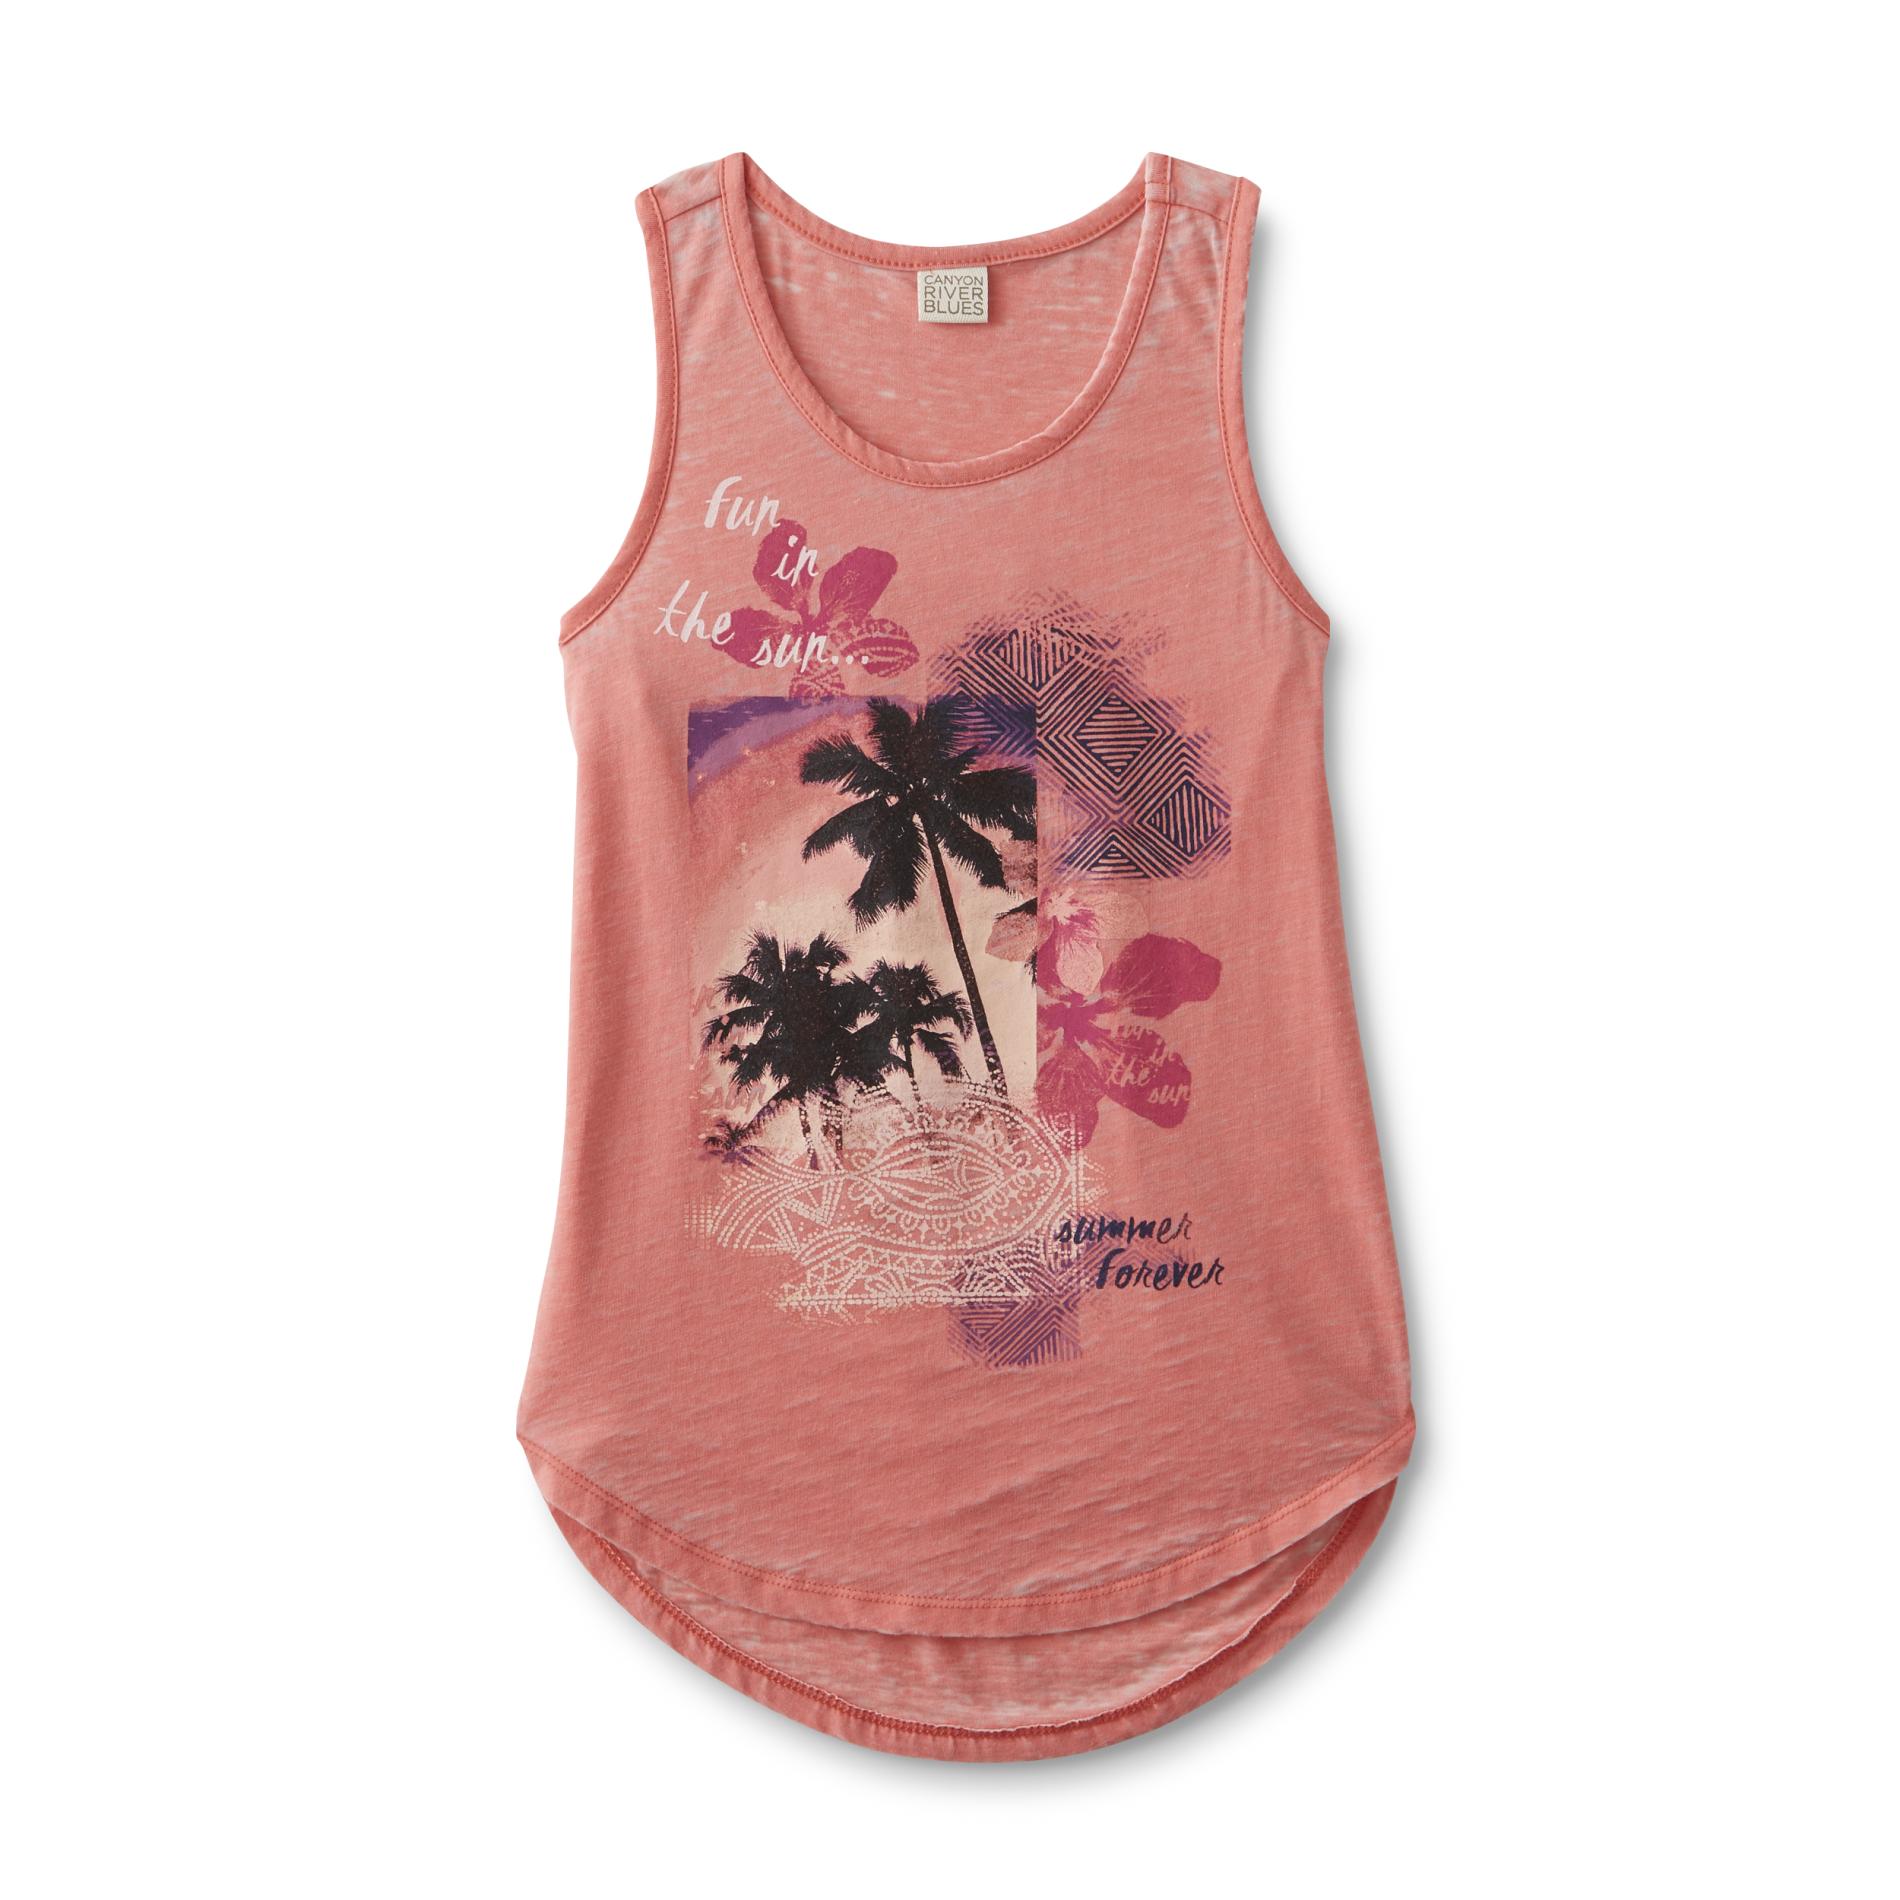 Girl's Graphic Tank Top - Palm Trees